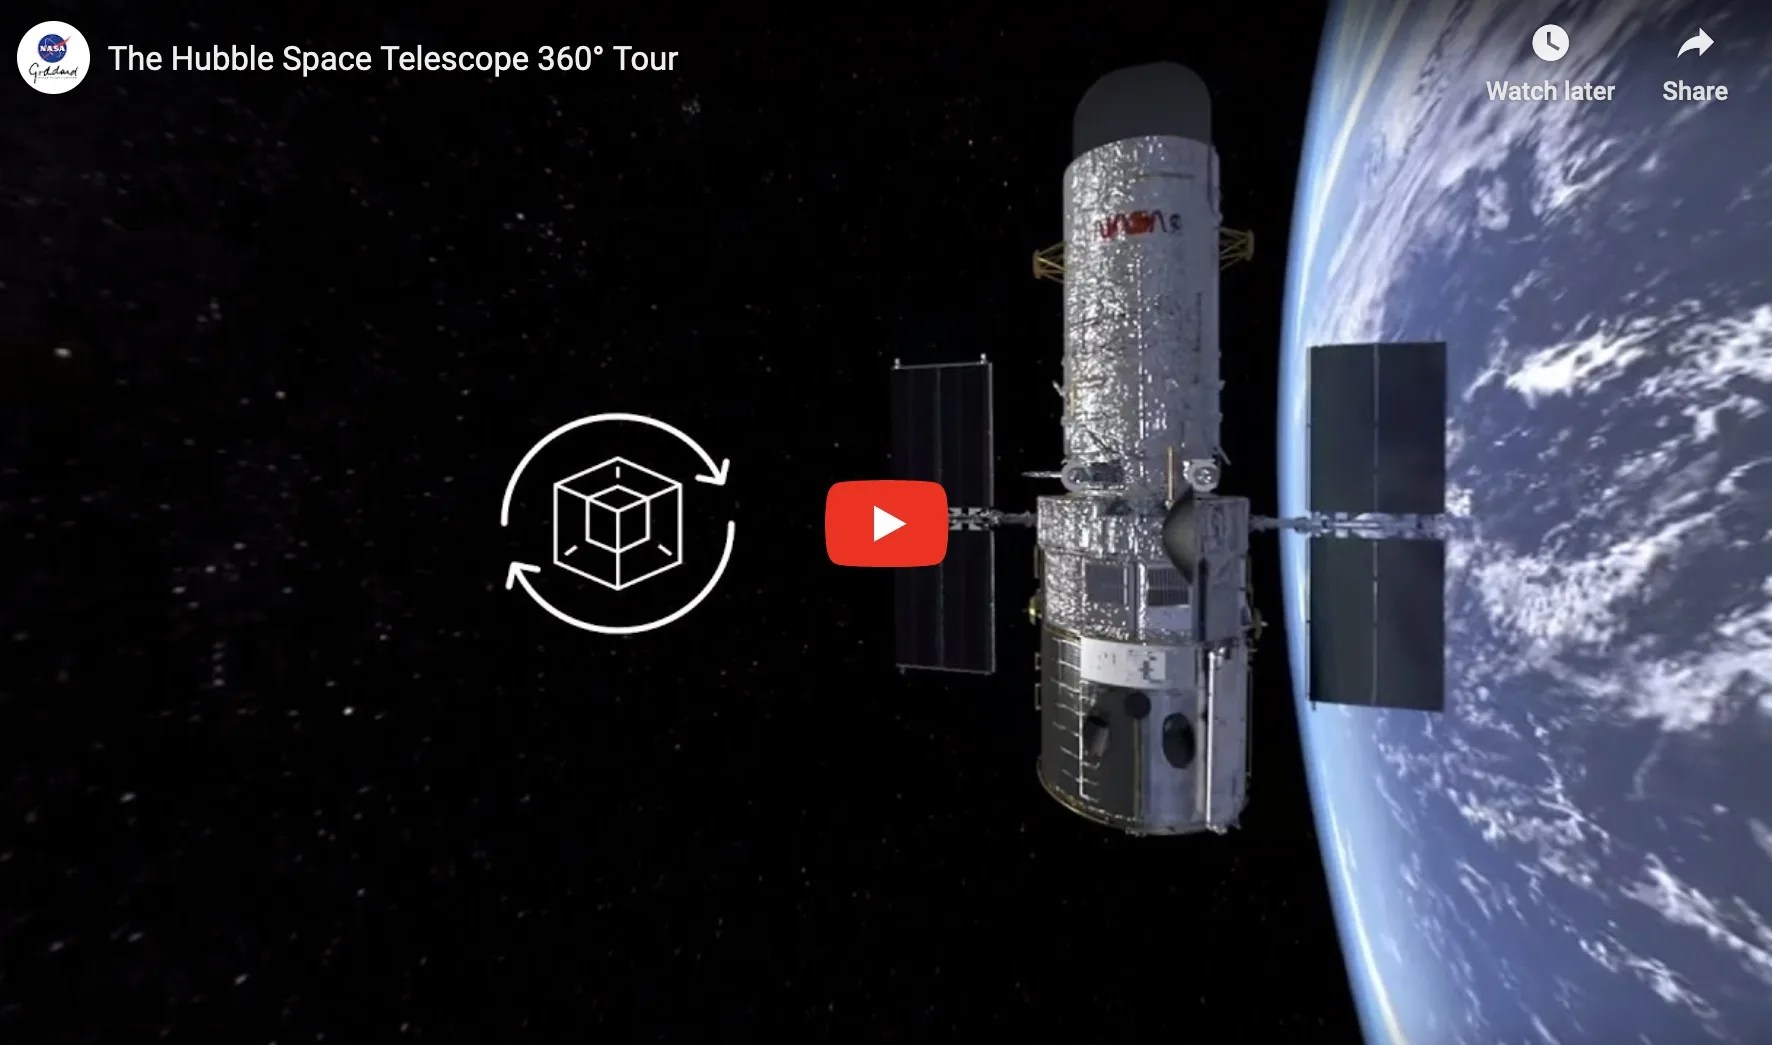 A Youtube 360 degree video with the opening screen for the Hubble Space Telescope tour.